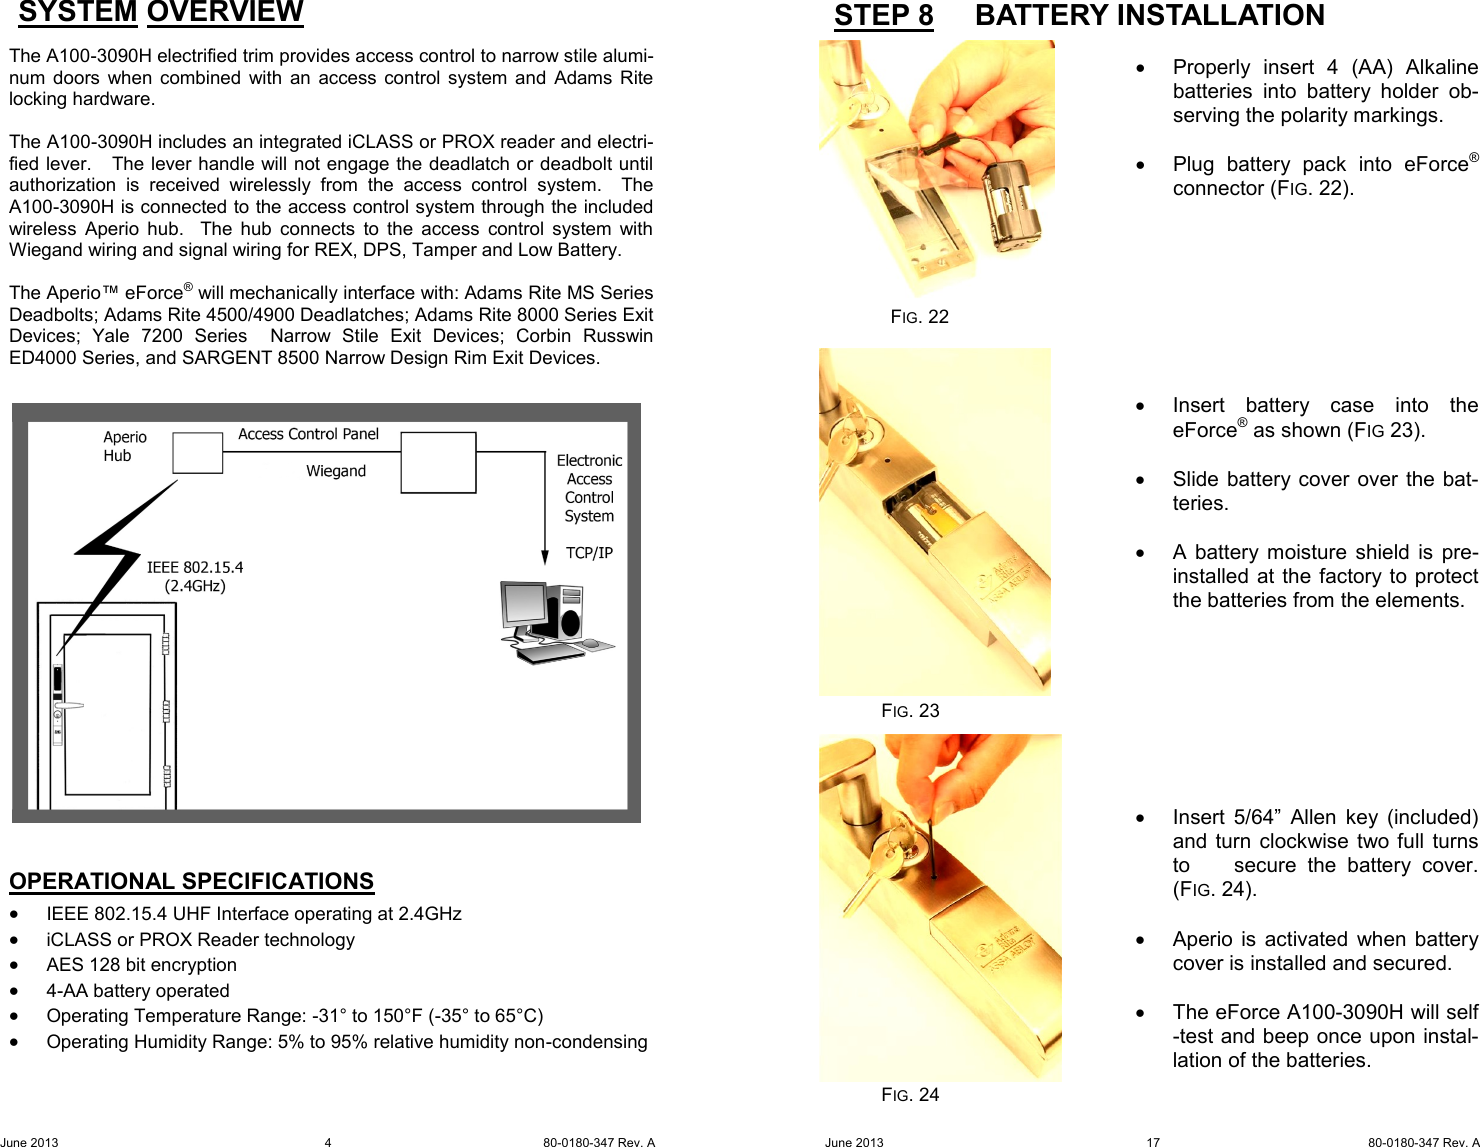 Page 4 of 10 - Adams Rite  A100-3090 Owner's Manual & Installation Instructions A100-3090H 80-0180-347 A